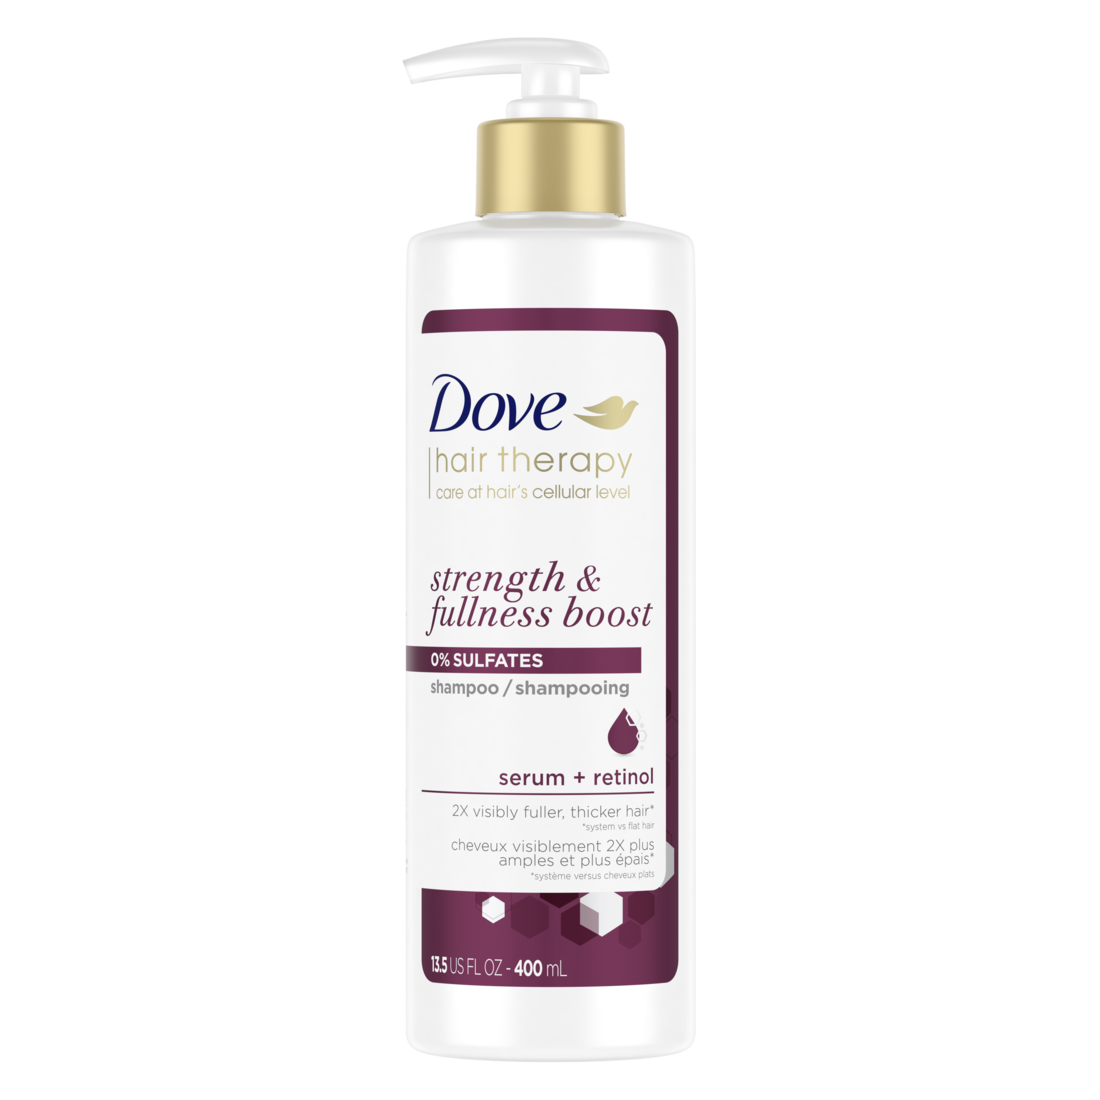 Dove Hair Therapy Shampooing Boost Force et Plénitude 400 ml